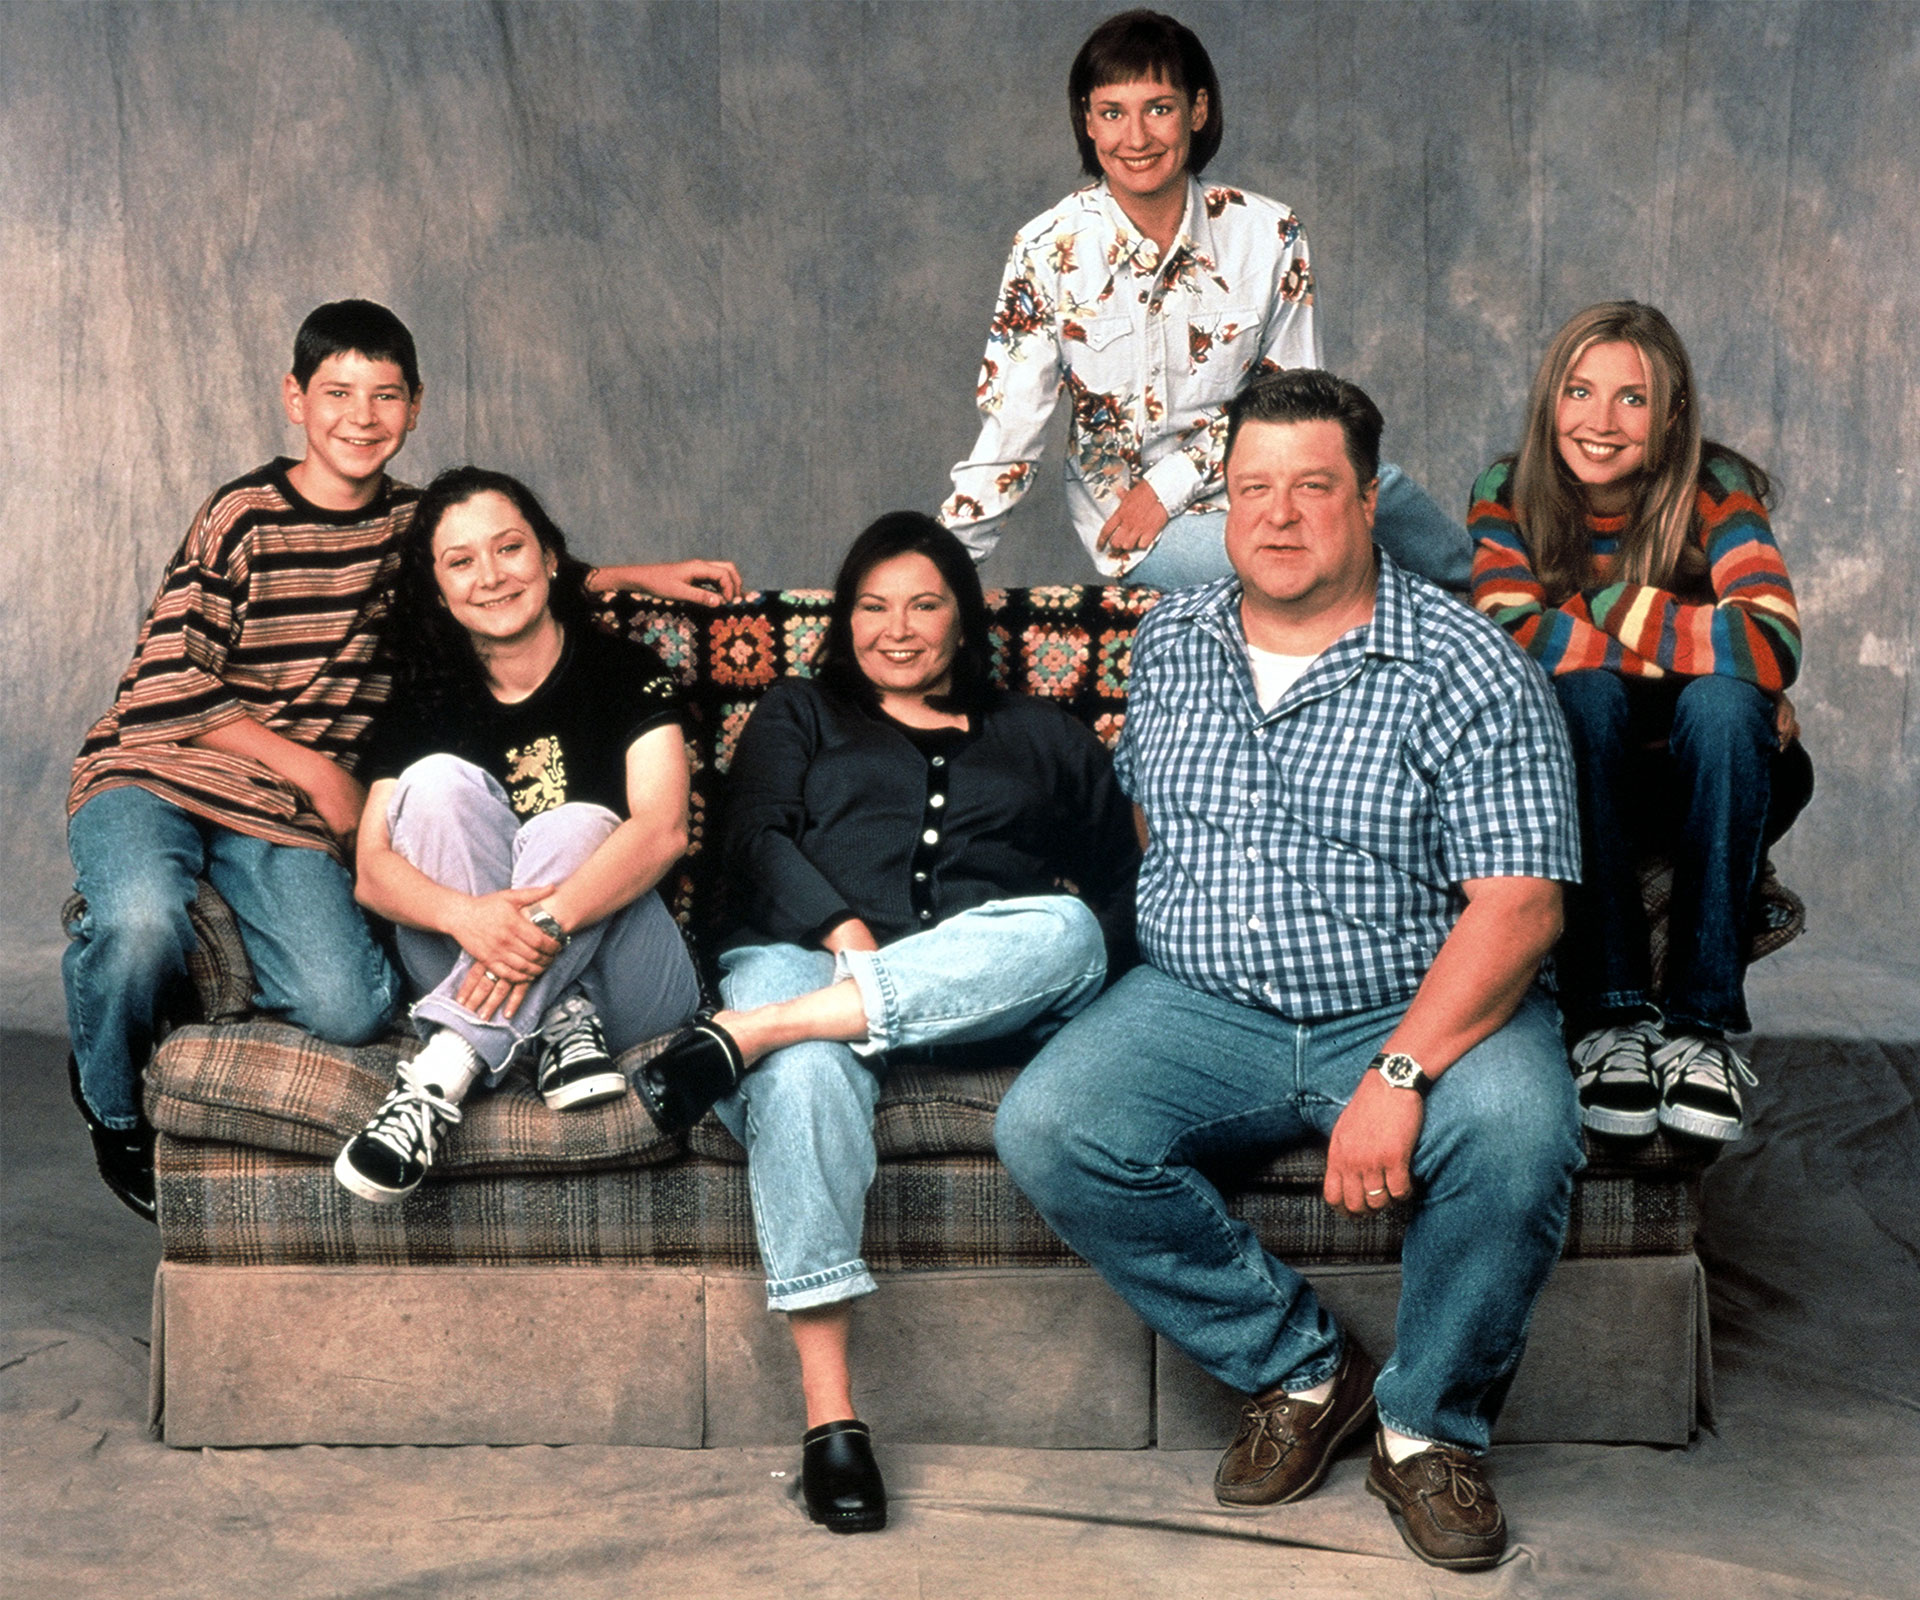 The cast of Roseanne 